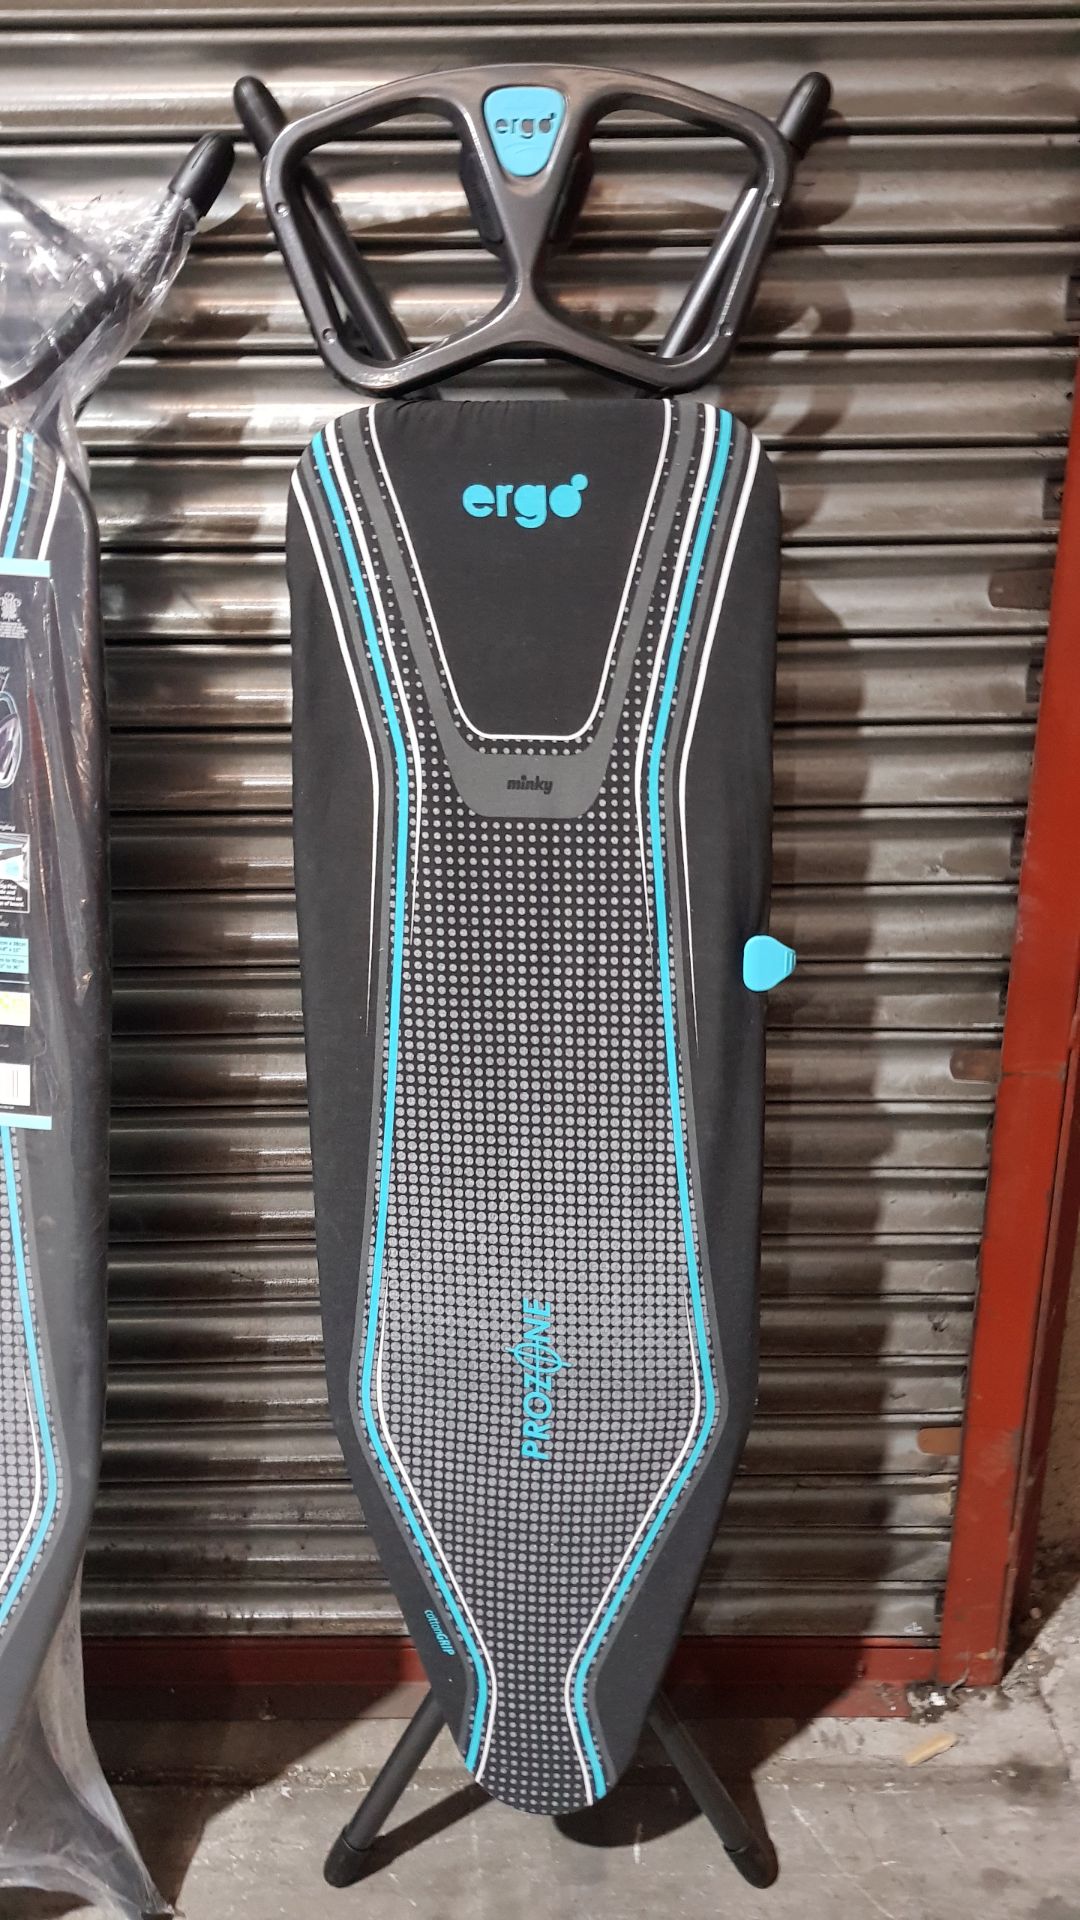 Description: (150/R3) Lot RRP £192 4x Minky Ergo Ironing Board RRP £48 Each This auction features - Image 6 of 9